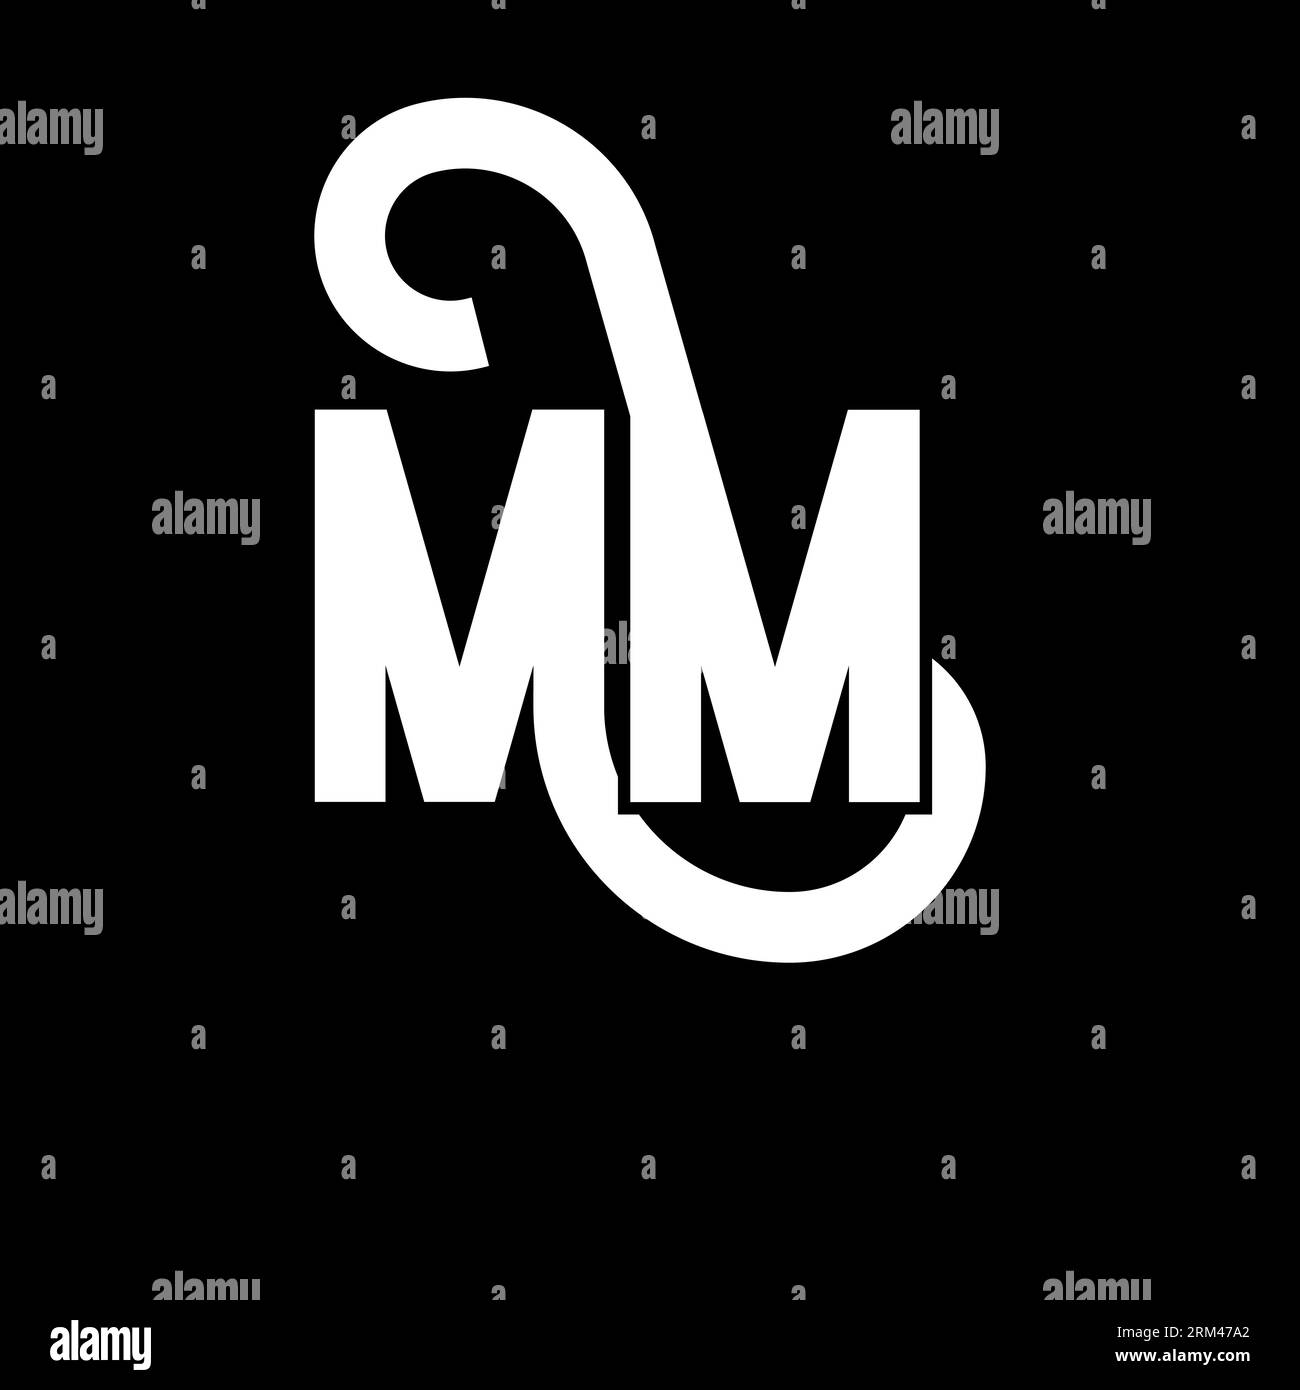 Abstract initial letter m or mm logo in black Vector Image